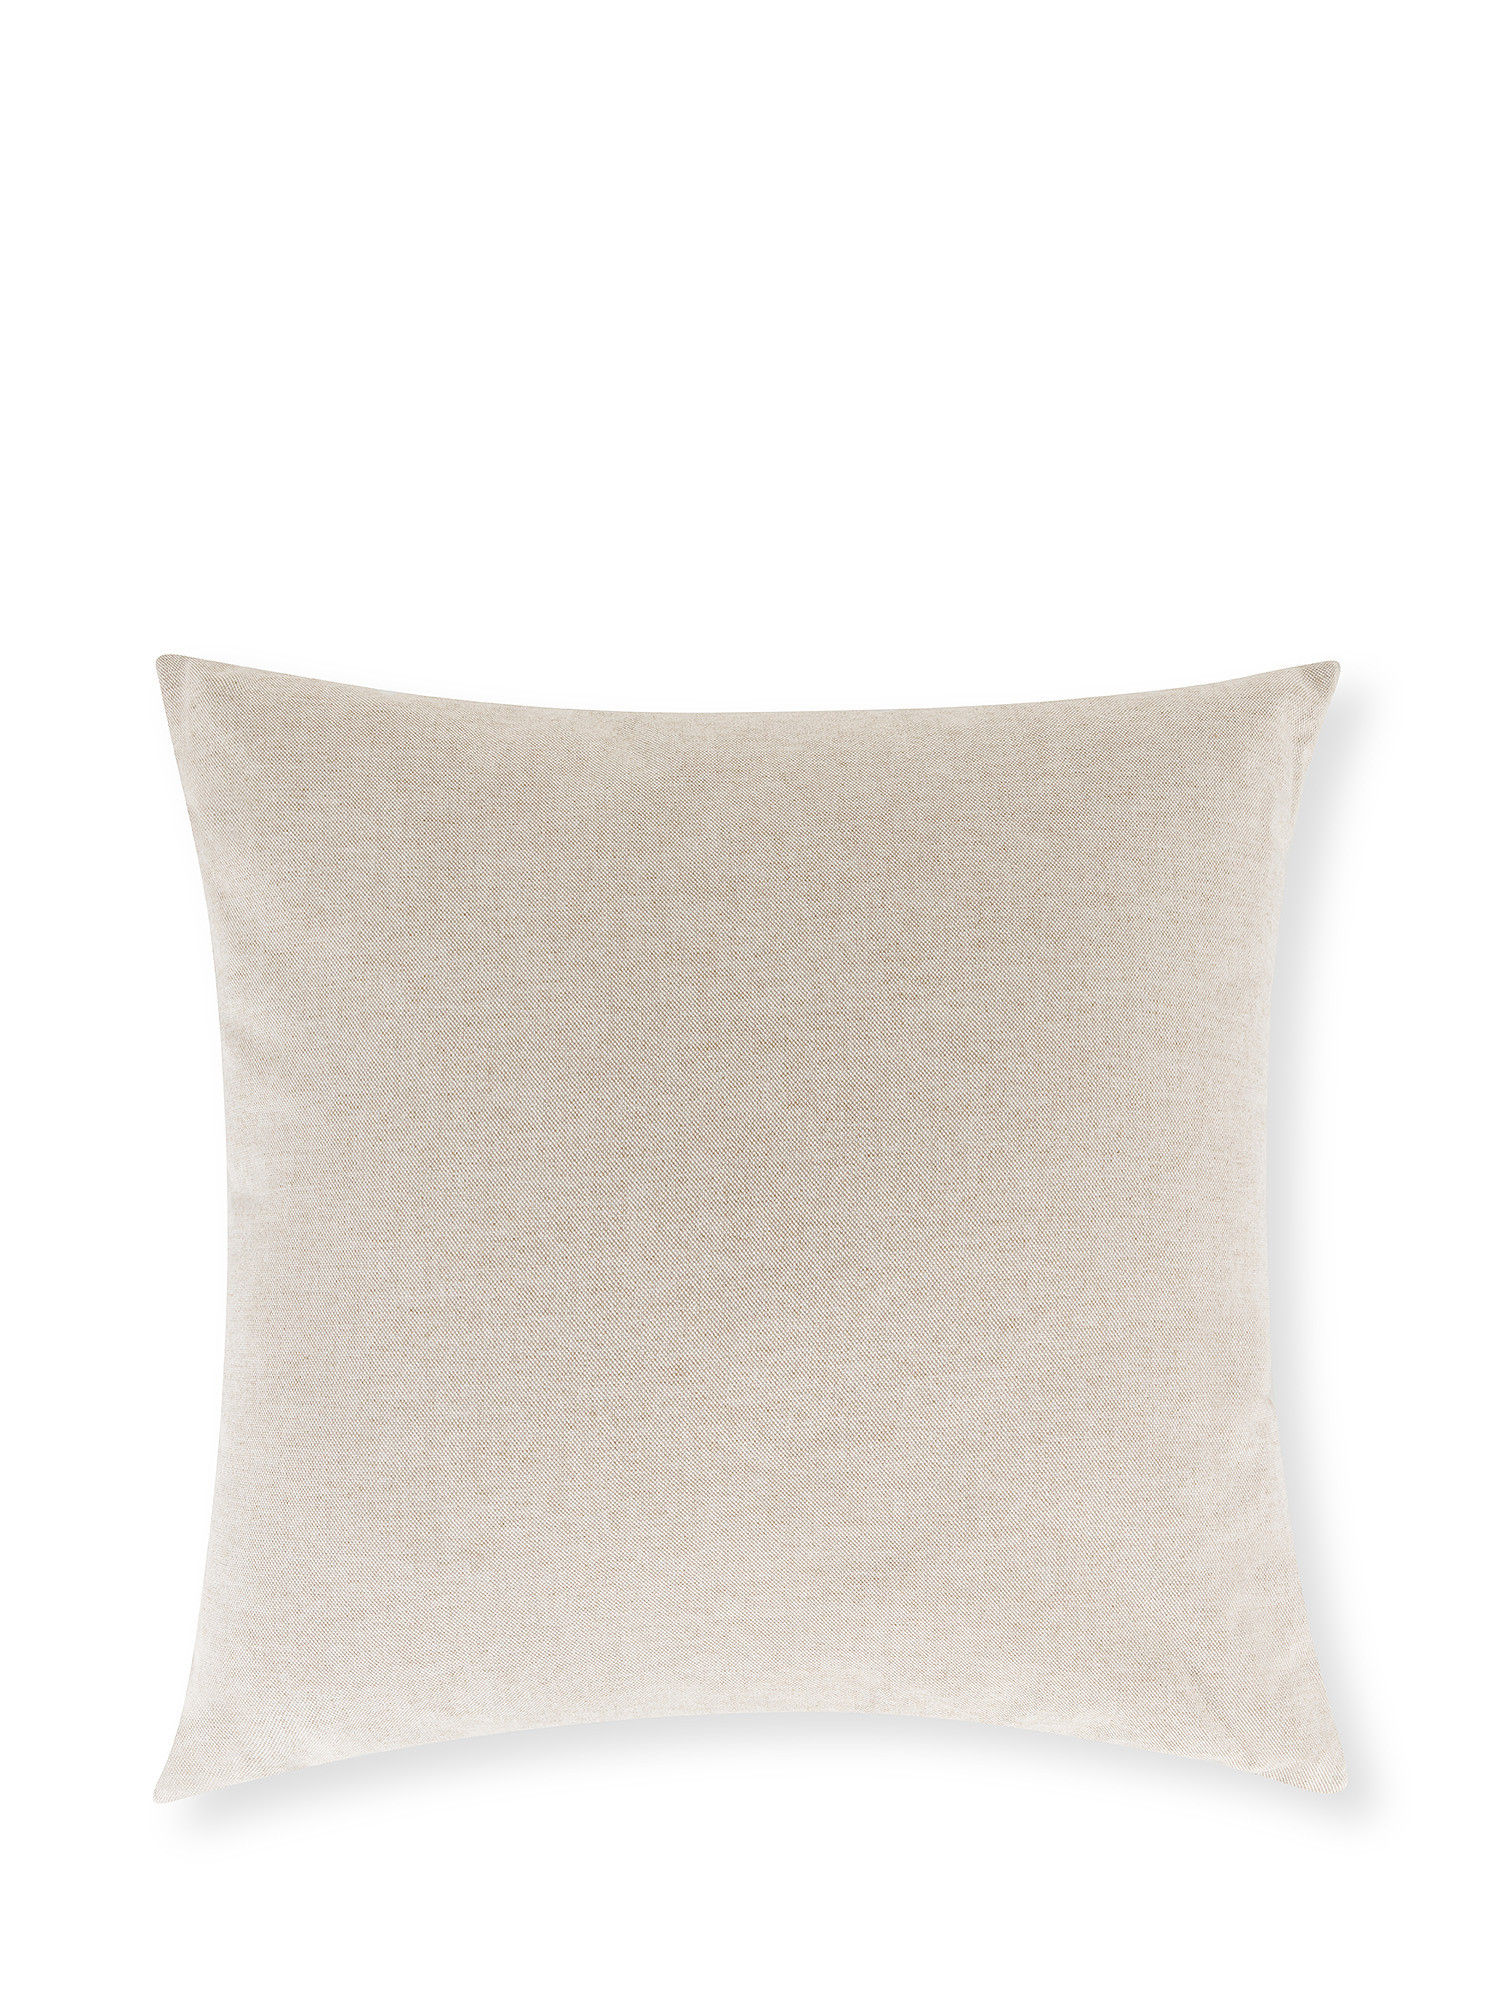 Cotton and linen blend cushion with flower motif 50x50cm, Beige, large image number 1